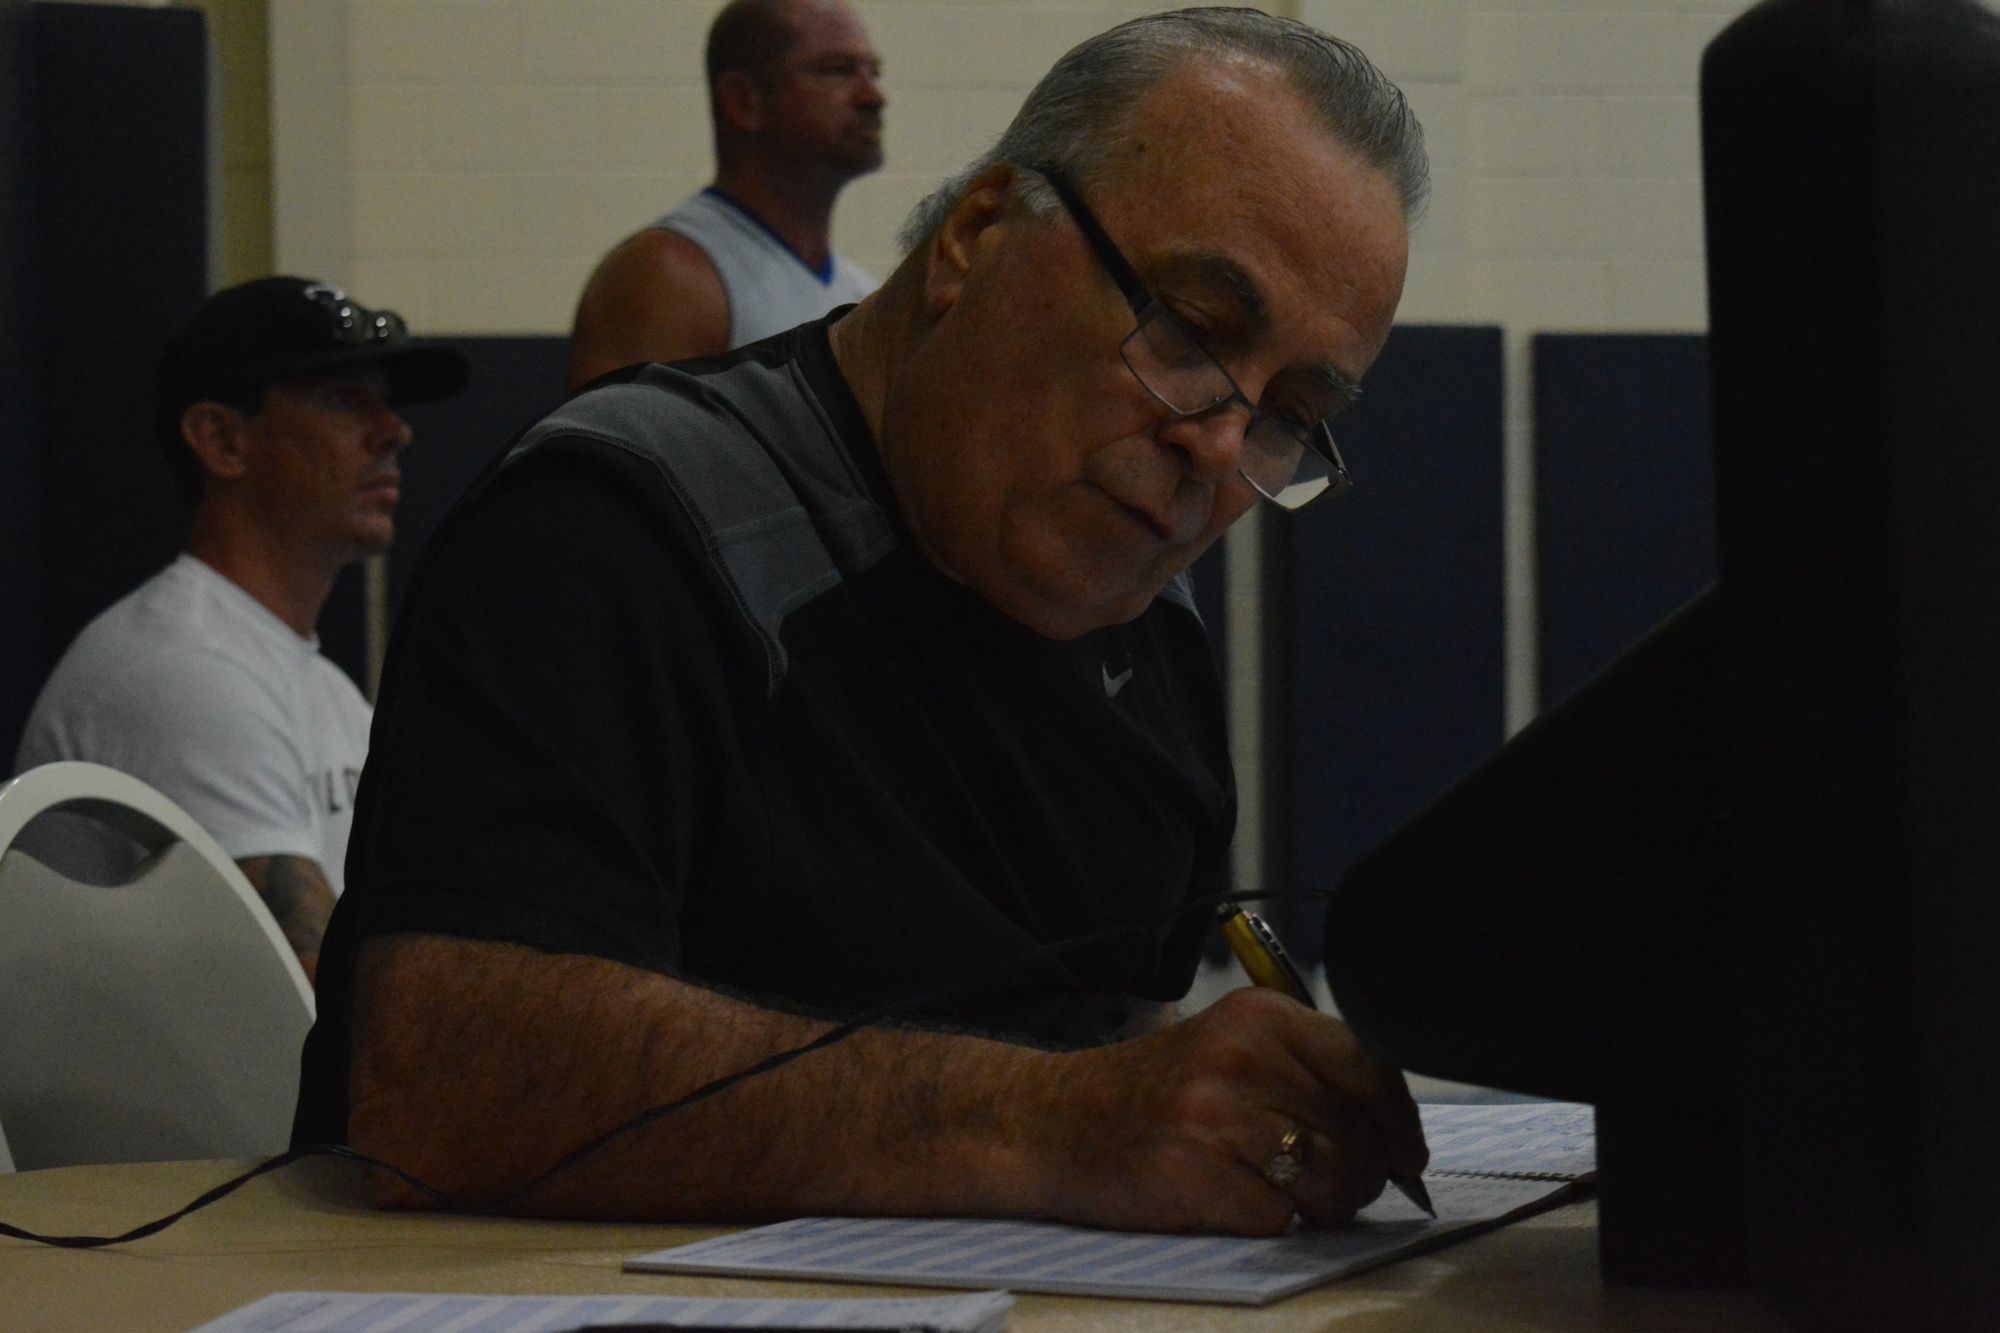 Dennis Bunker keeps score during the championship game.